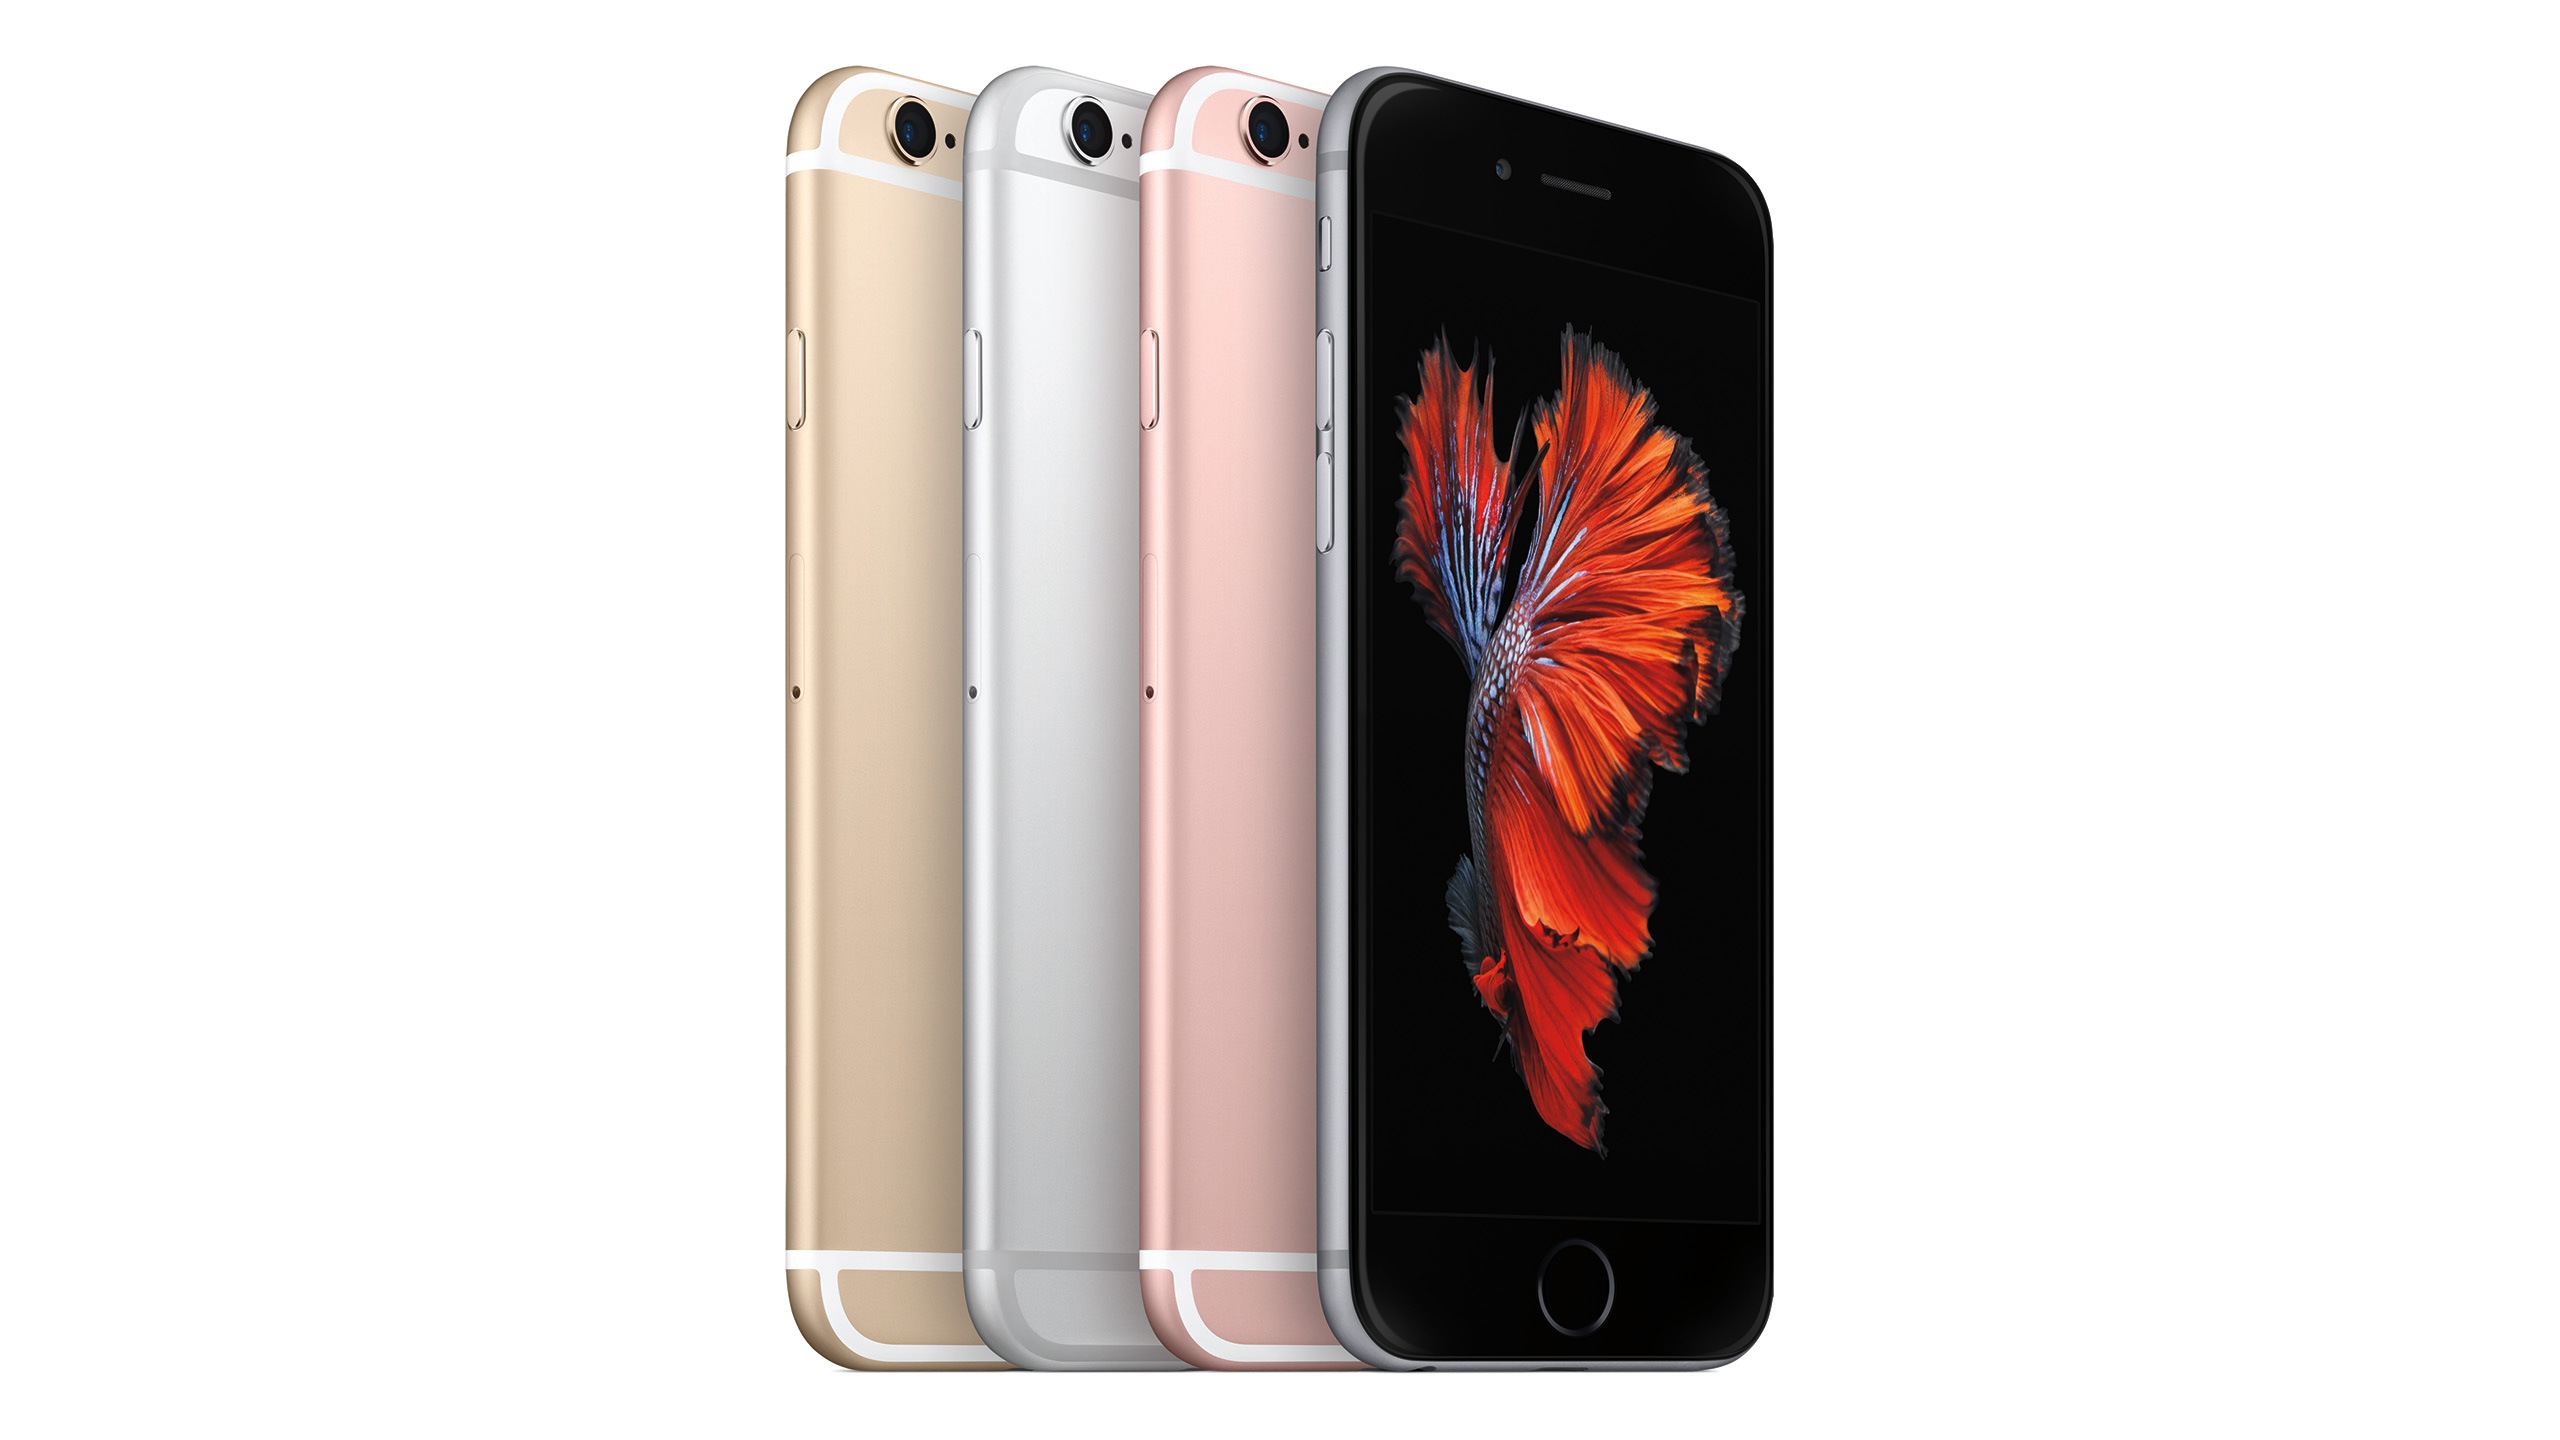 Reminder: iPhone 6s and iPhone 6s Plus Pre-Orders Go Live Tonight!